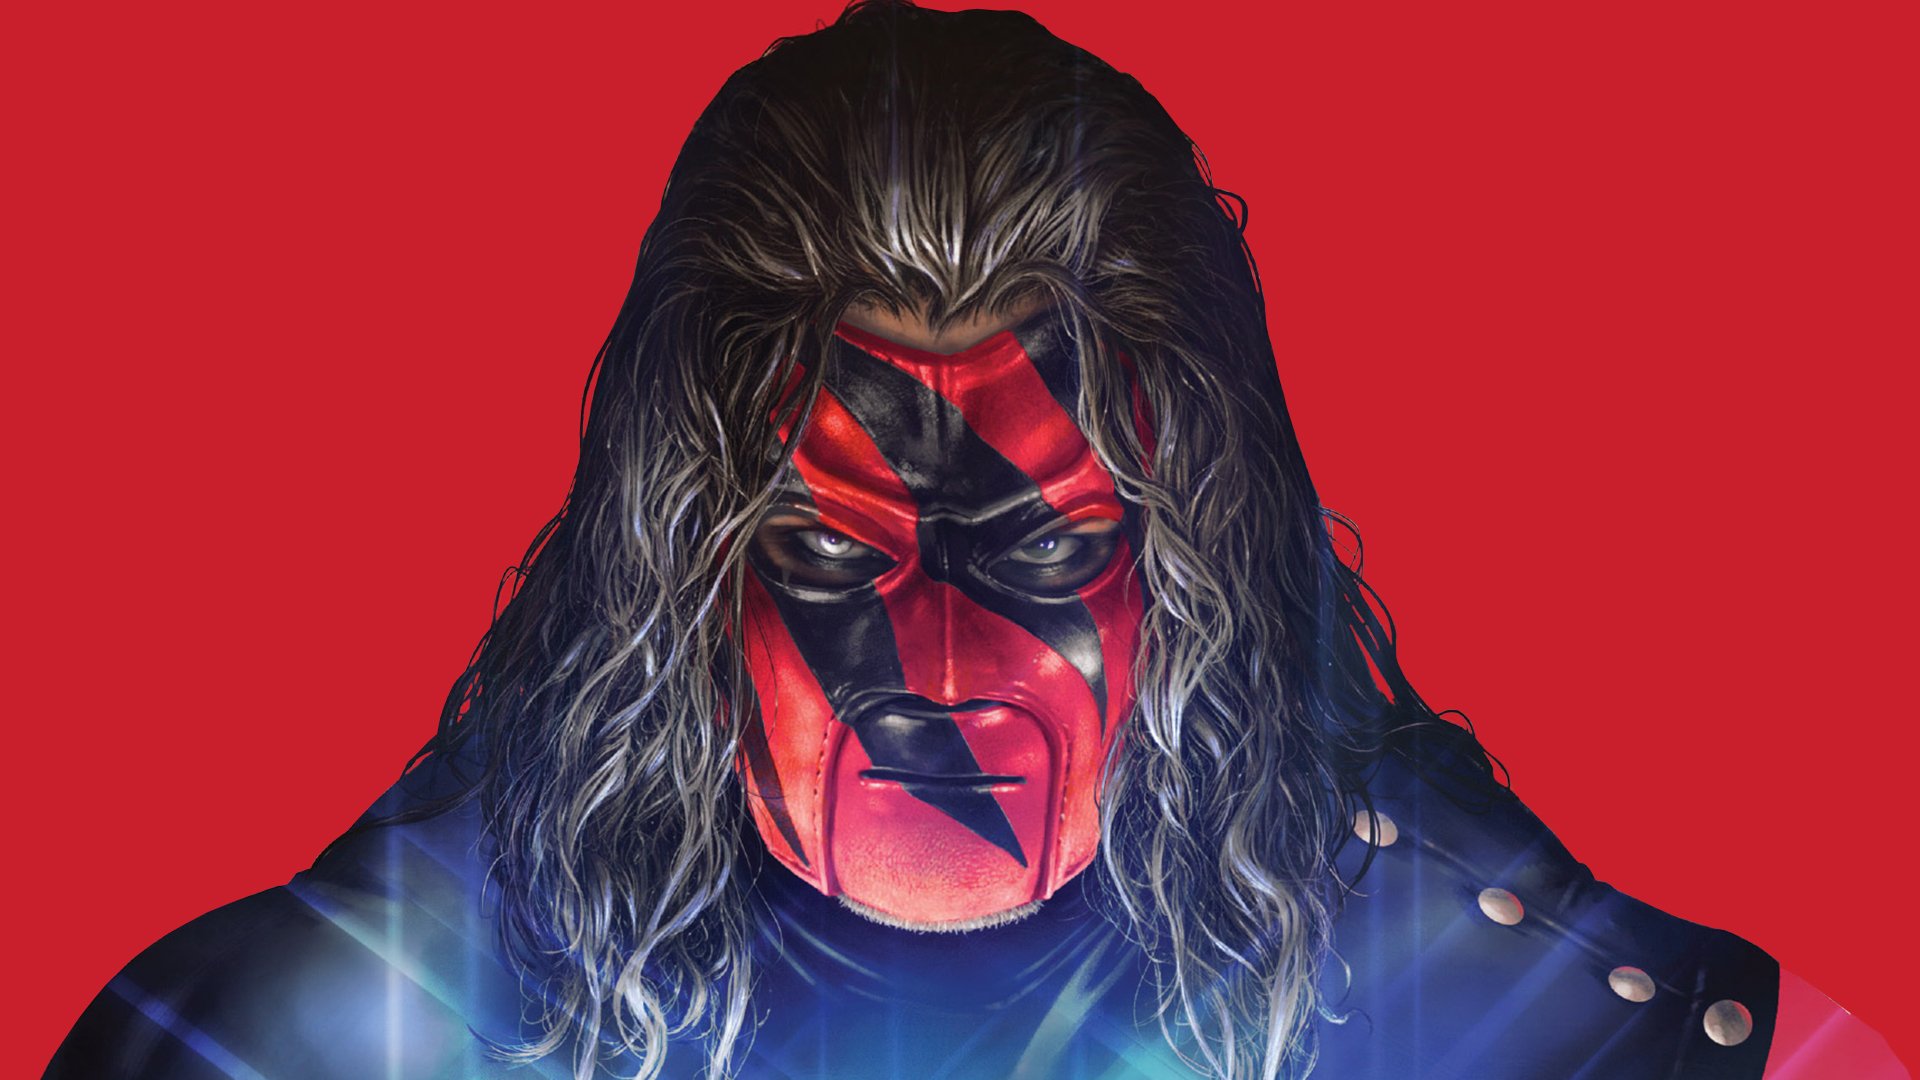 Wrestler Kane wallpapers and photos for desktop and mobile